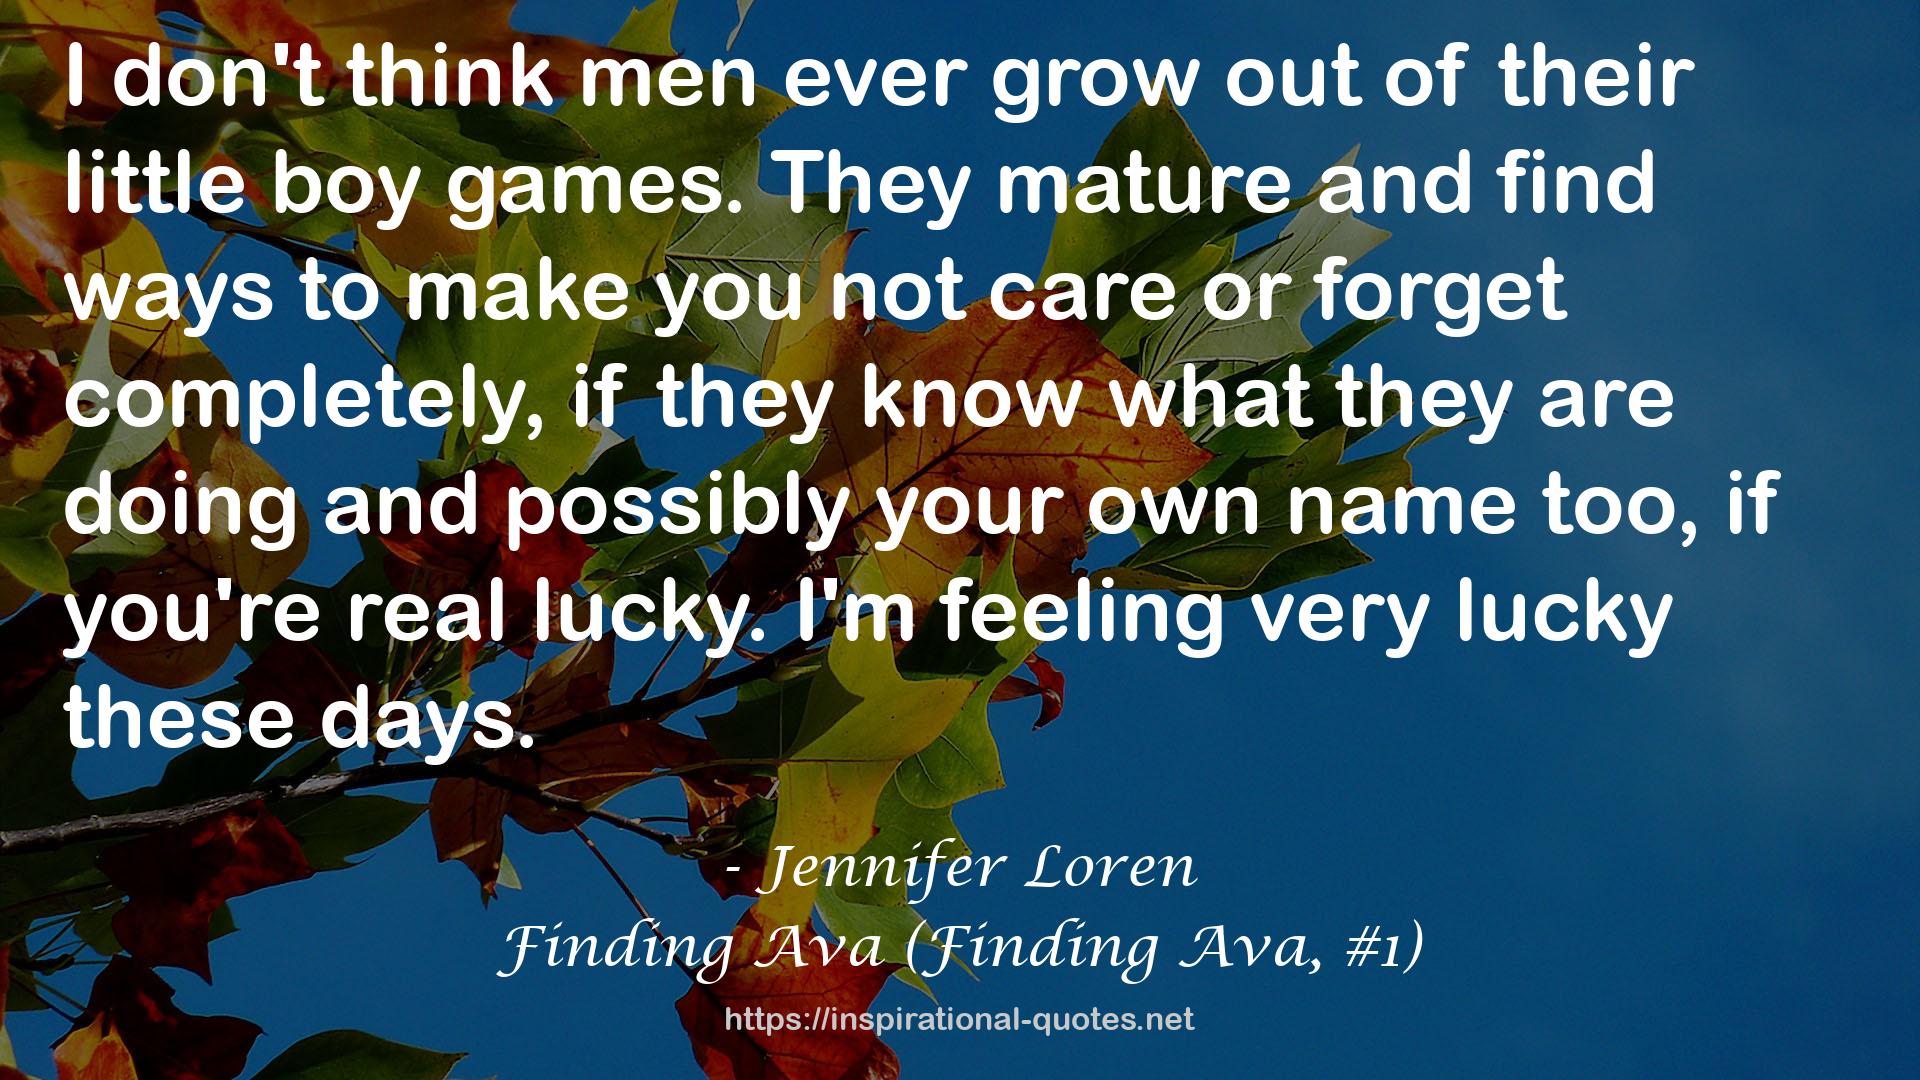 Finding Ava (Finding Ava, #1) QUOTES